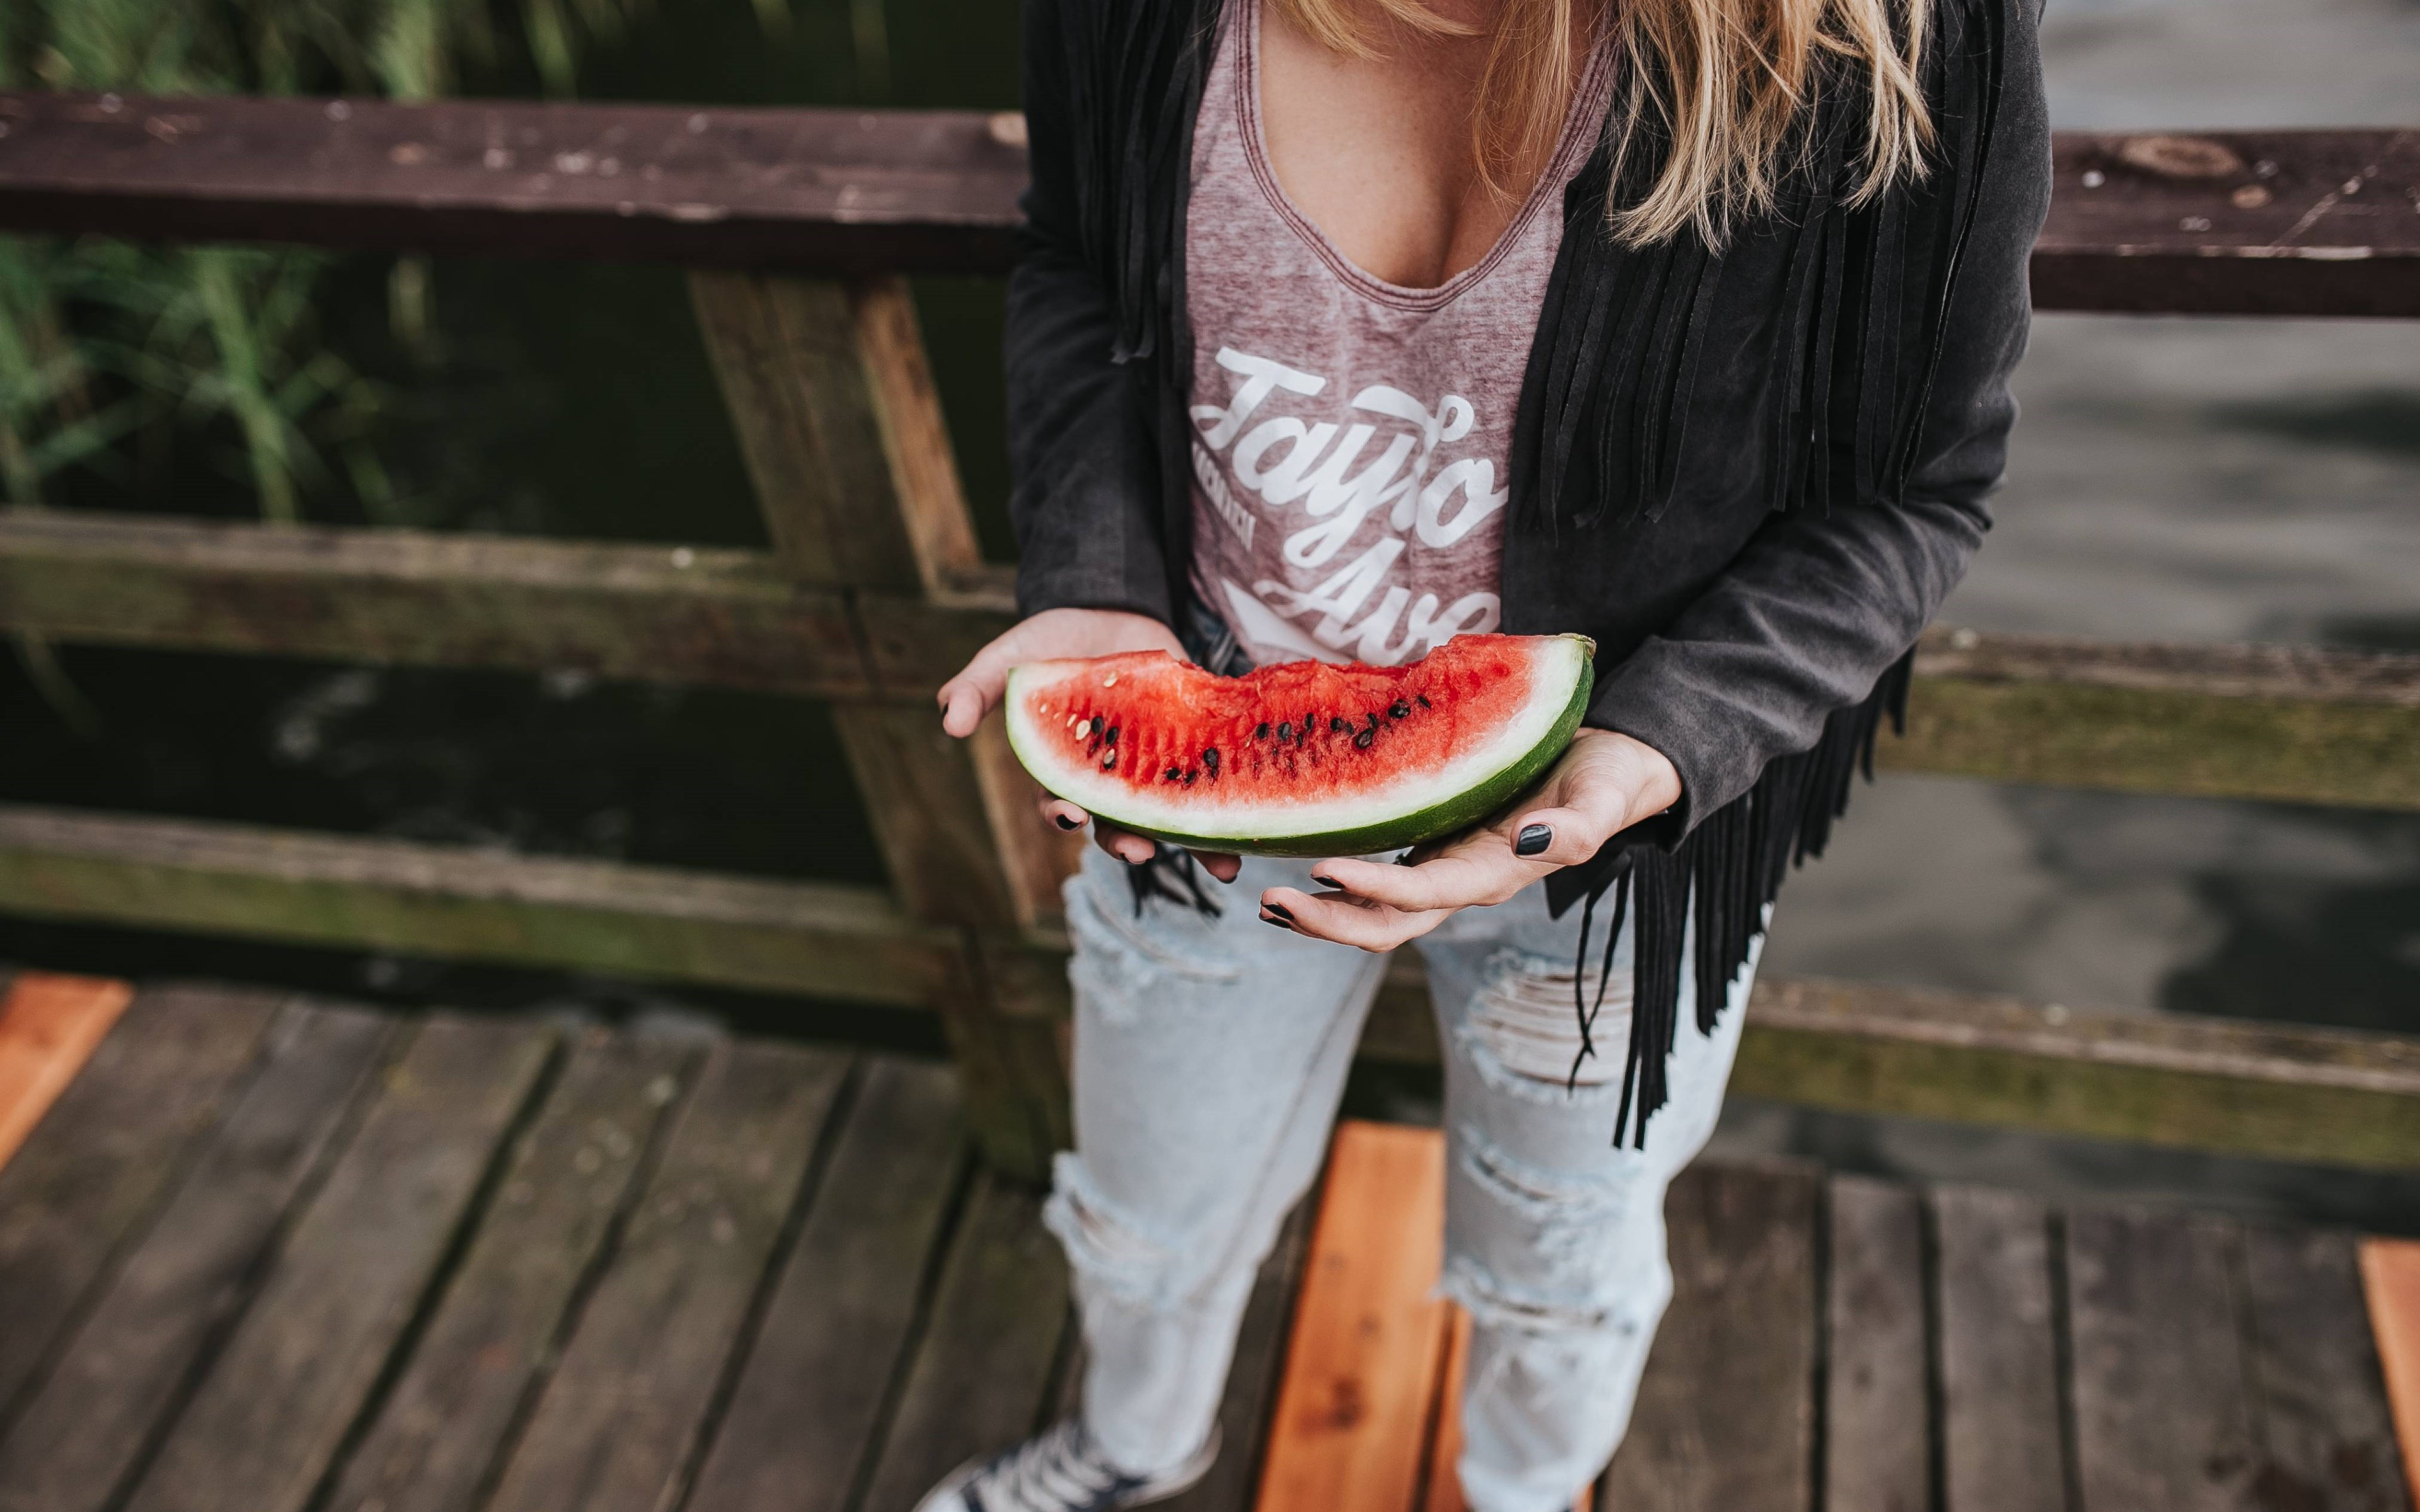 The girl with a watermelon slice wallpaper 3840x2400